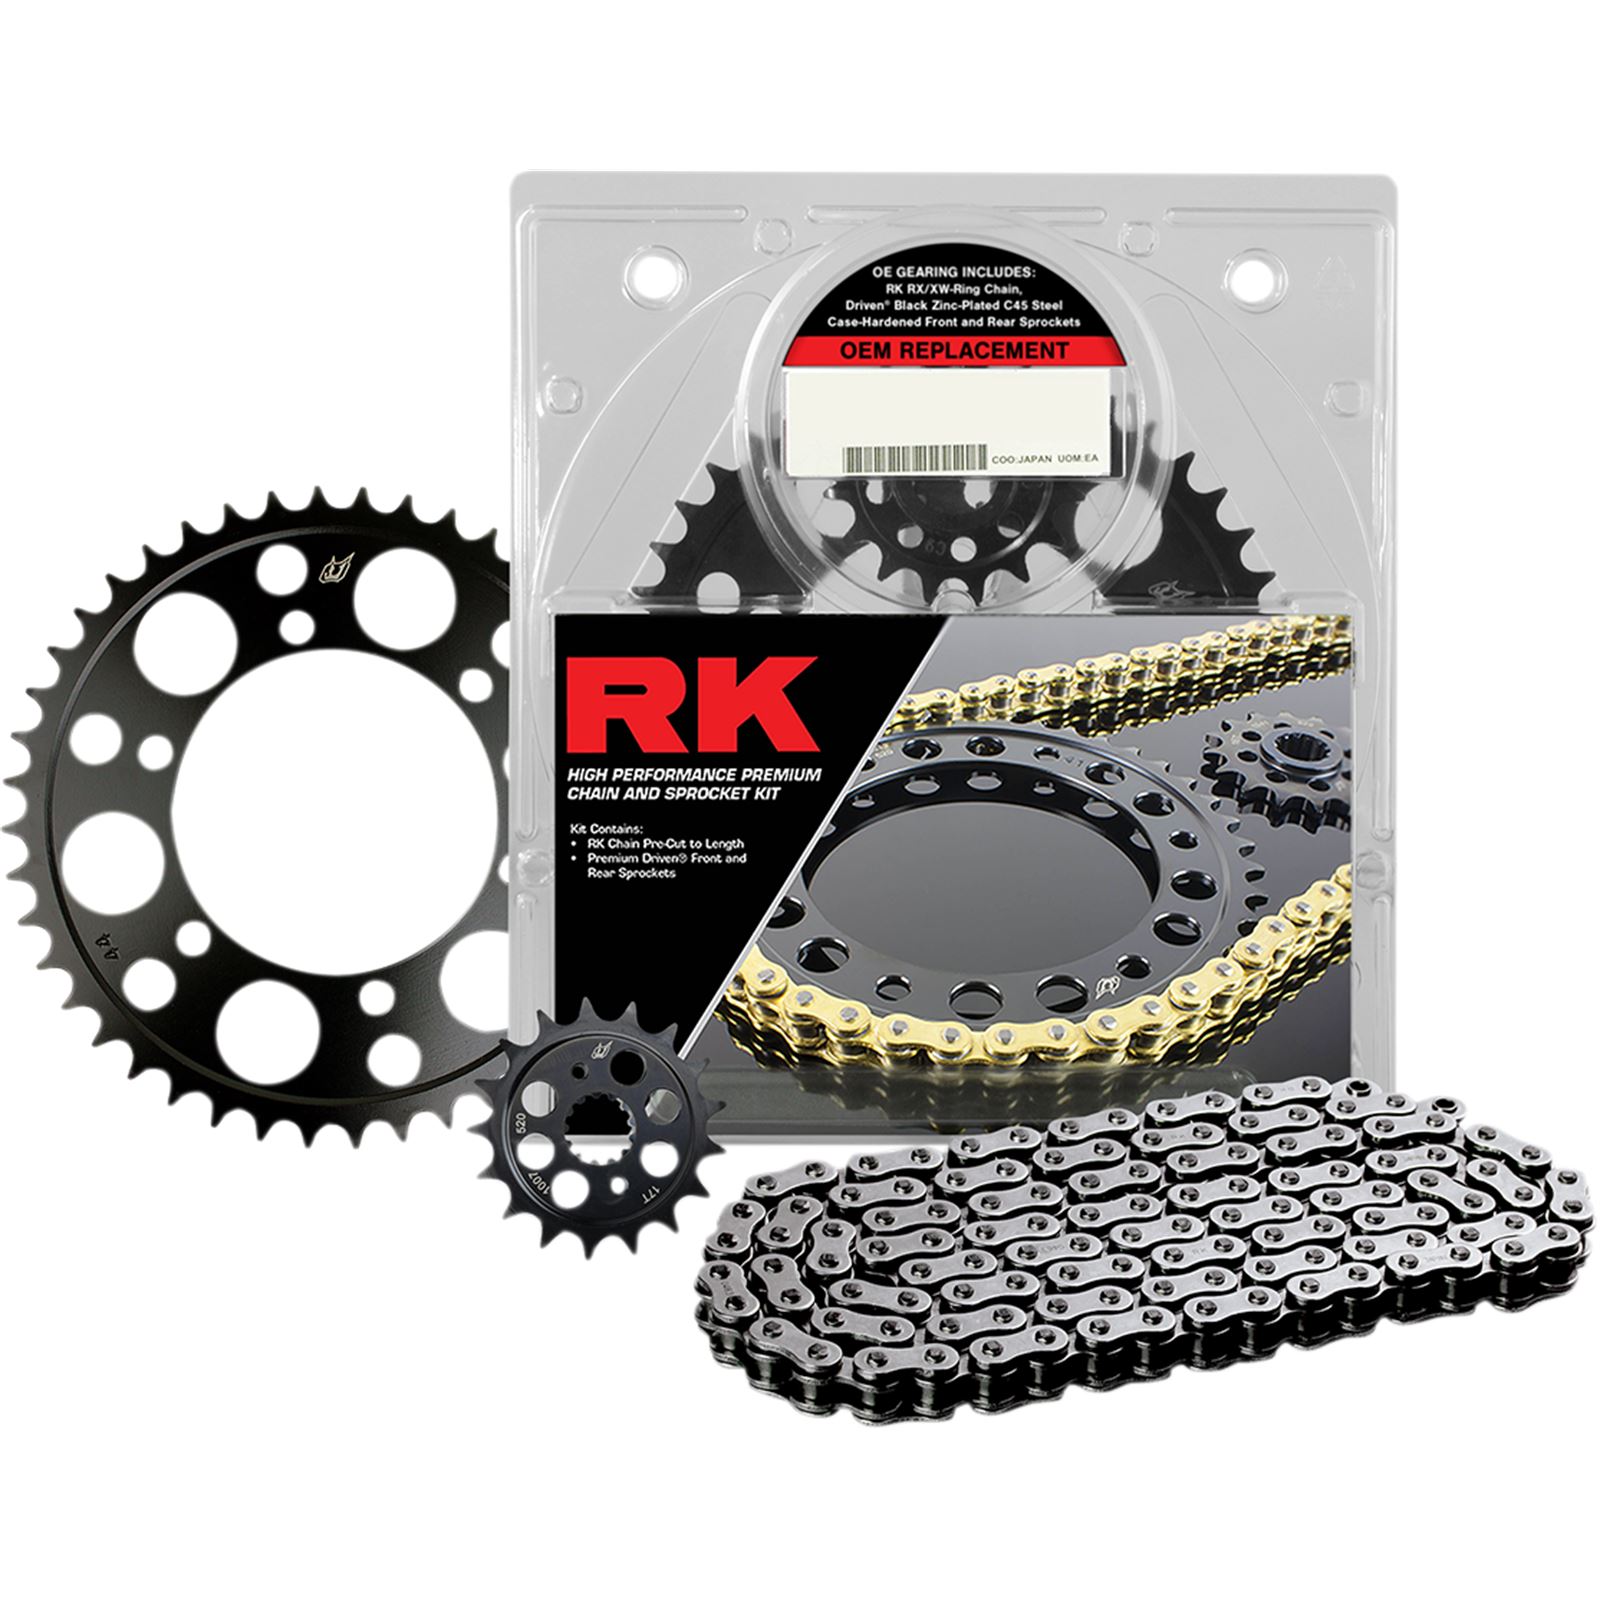 RK Excel Chain Kit for Yamaha - YZF 600 R '94-'07